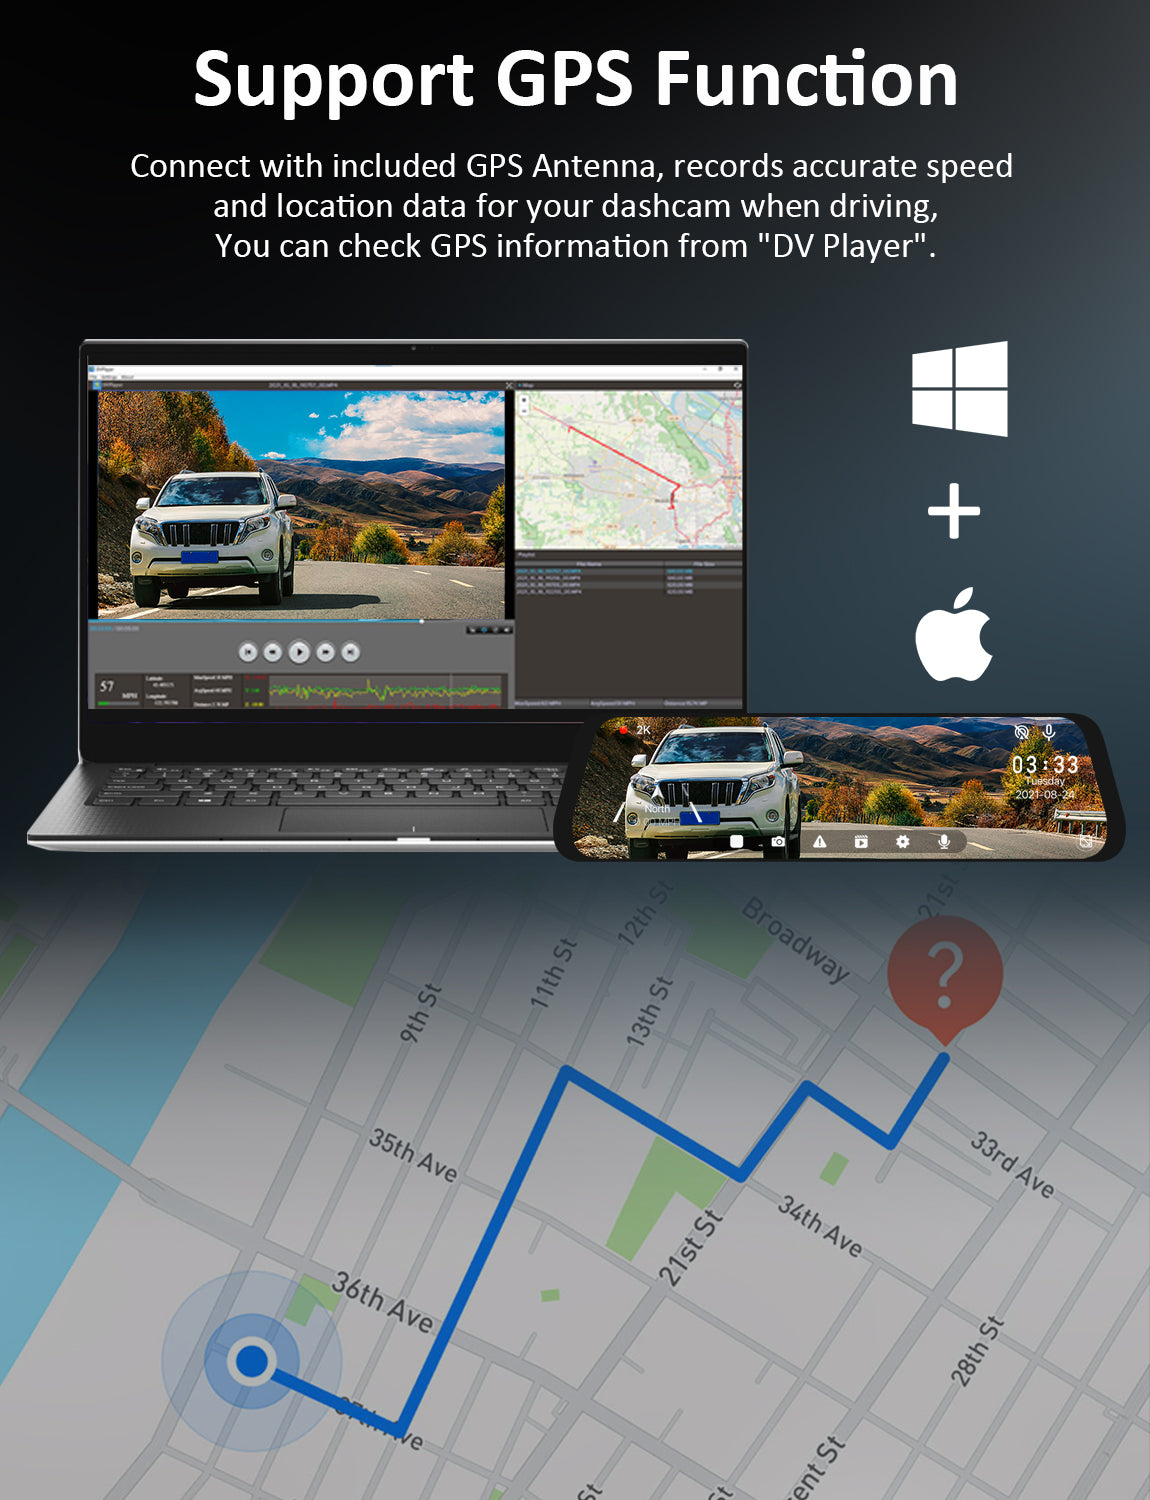 View the driving trajectory by downloading the DV Player for MAC or Windows users.